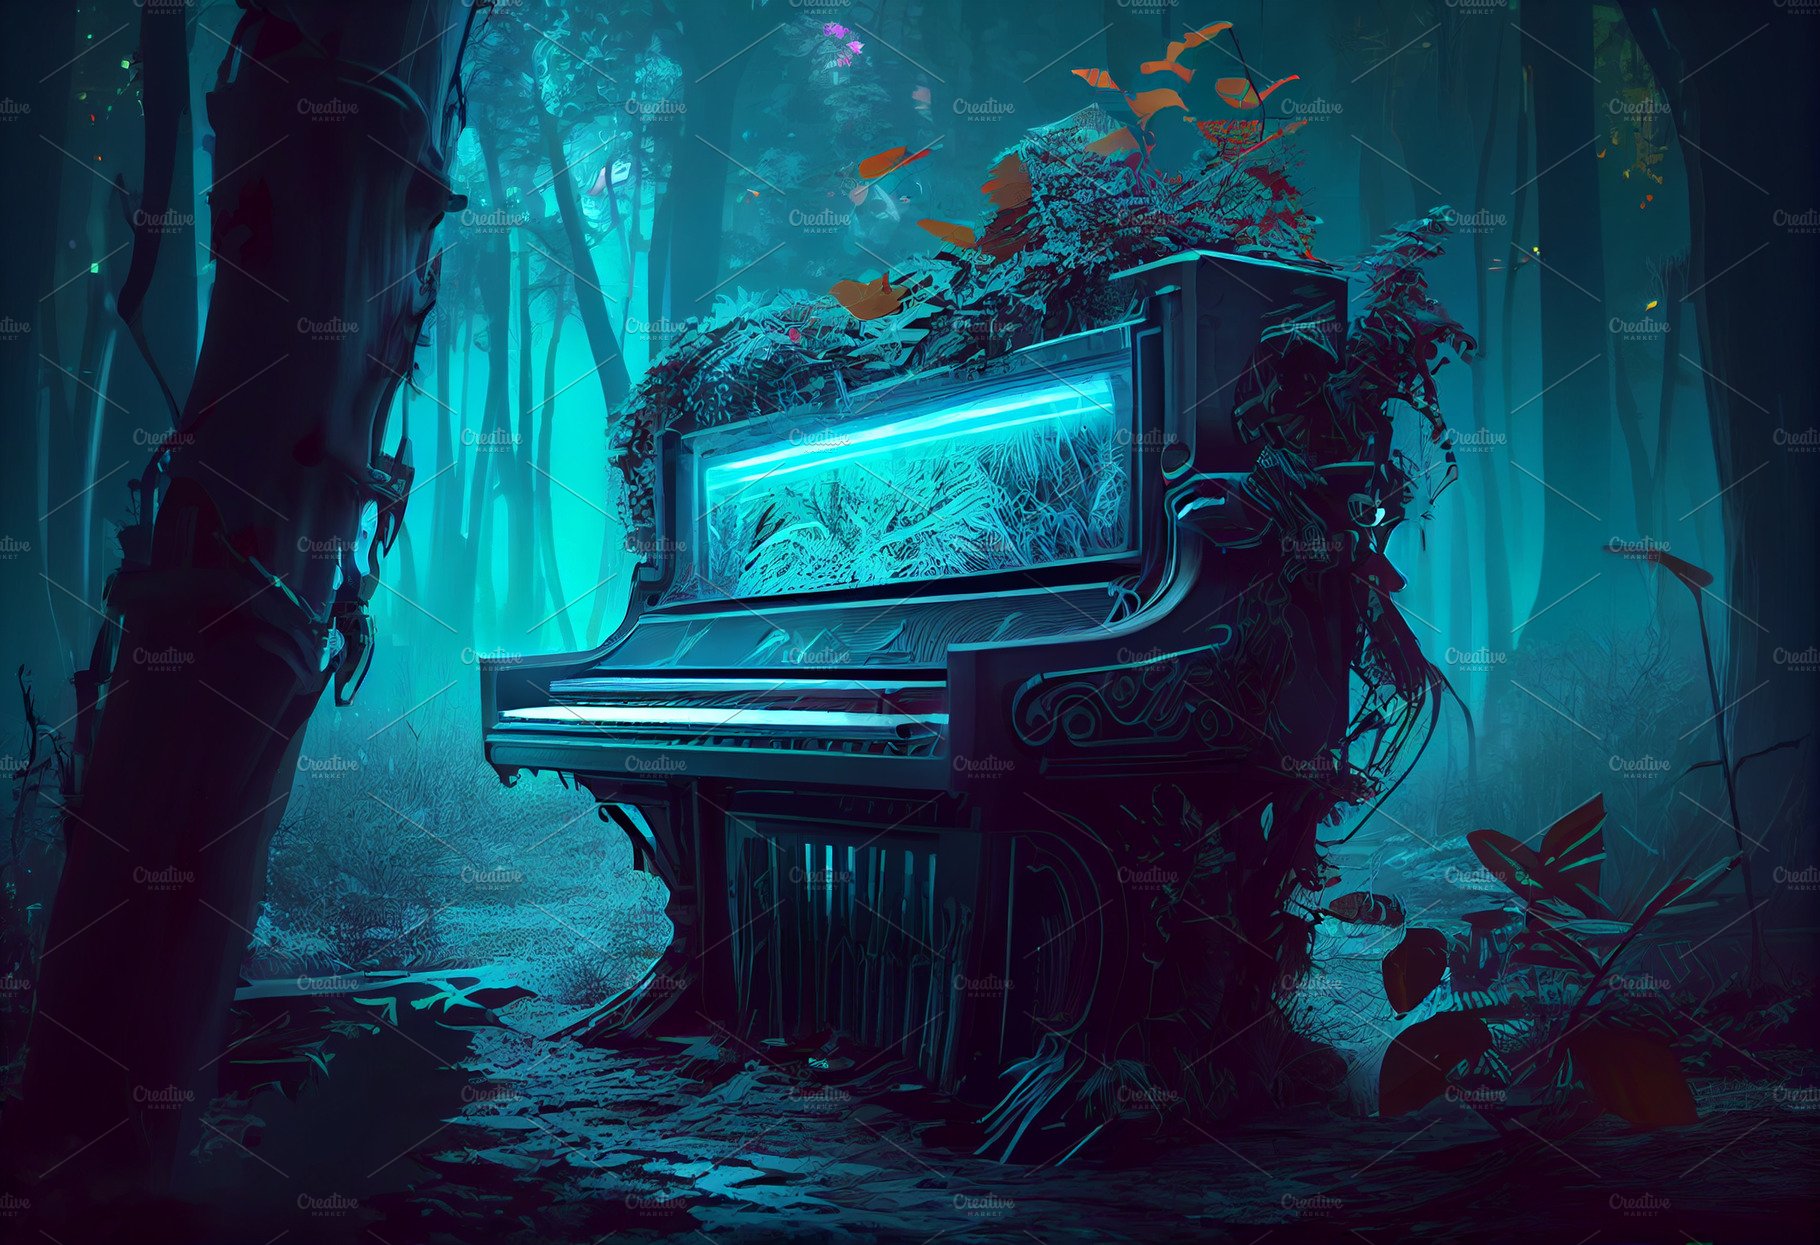 Elysium Piano standing in jungle forest in avatar style with neon lights il... cover image.